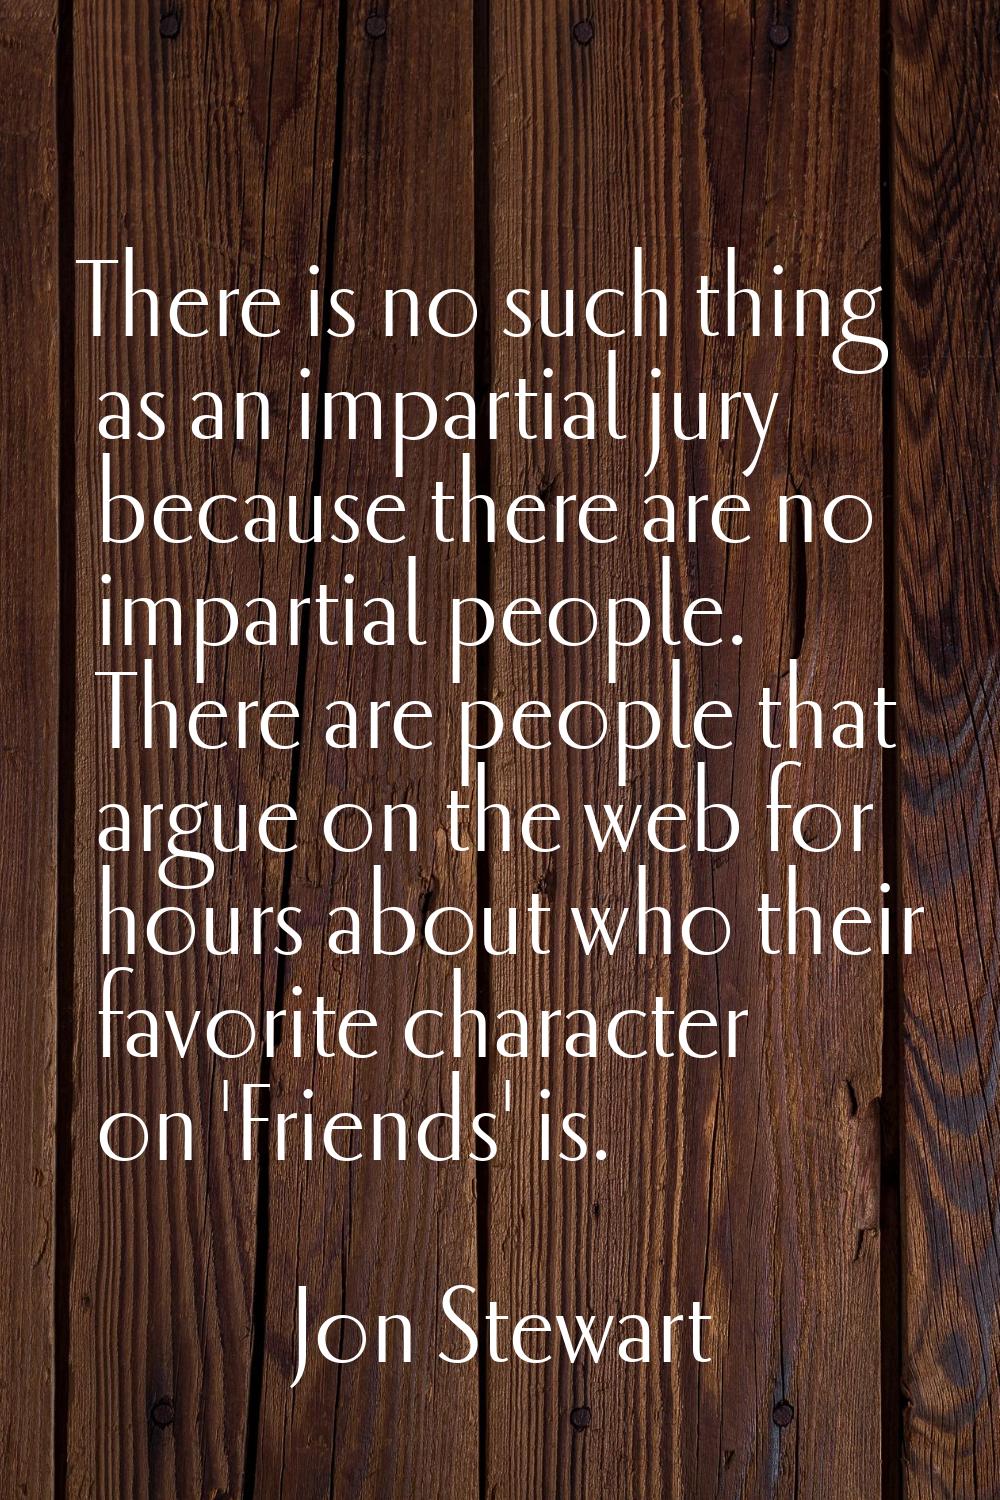 There is no such thing as an impartial jury because there are no impartial people. There are people